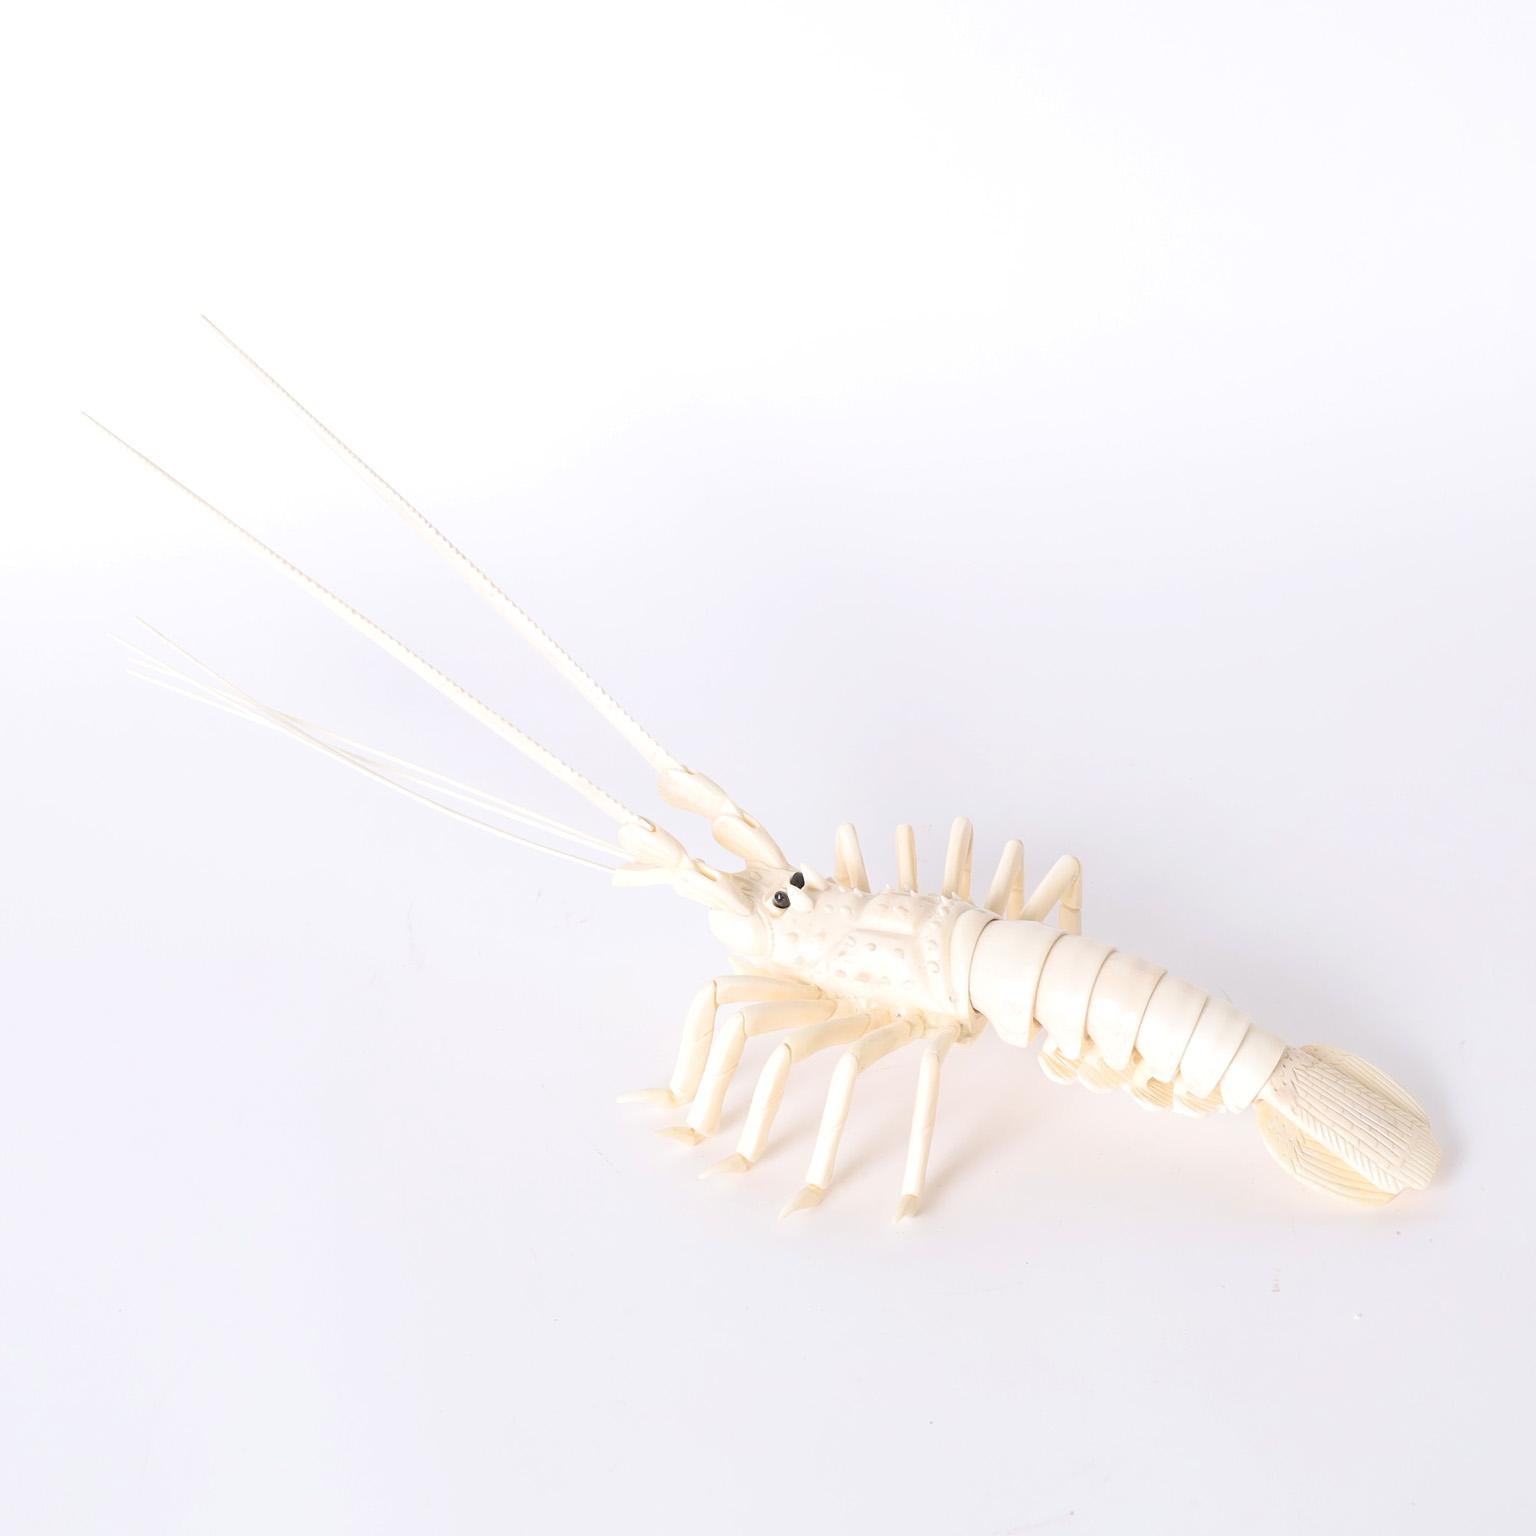 Lobster sculpture or object of art crafted in carved bone with hinged antennae and flexible tail. 

These are no longer being made.